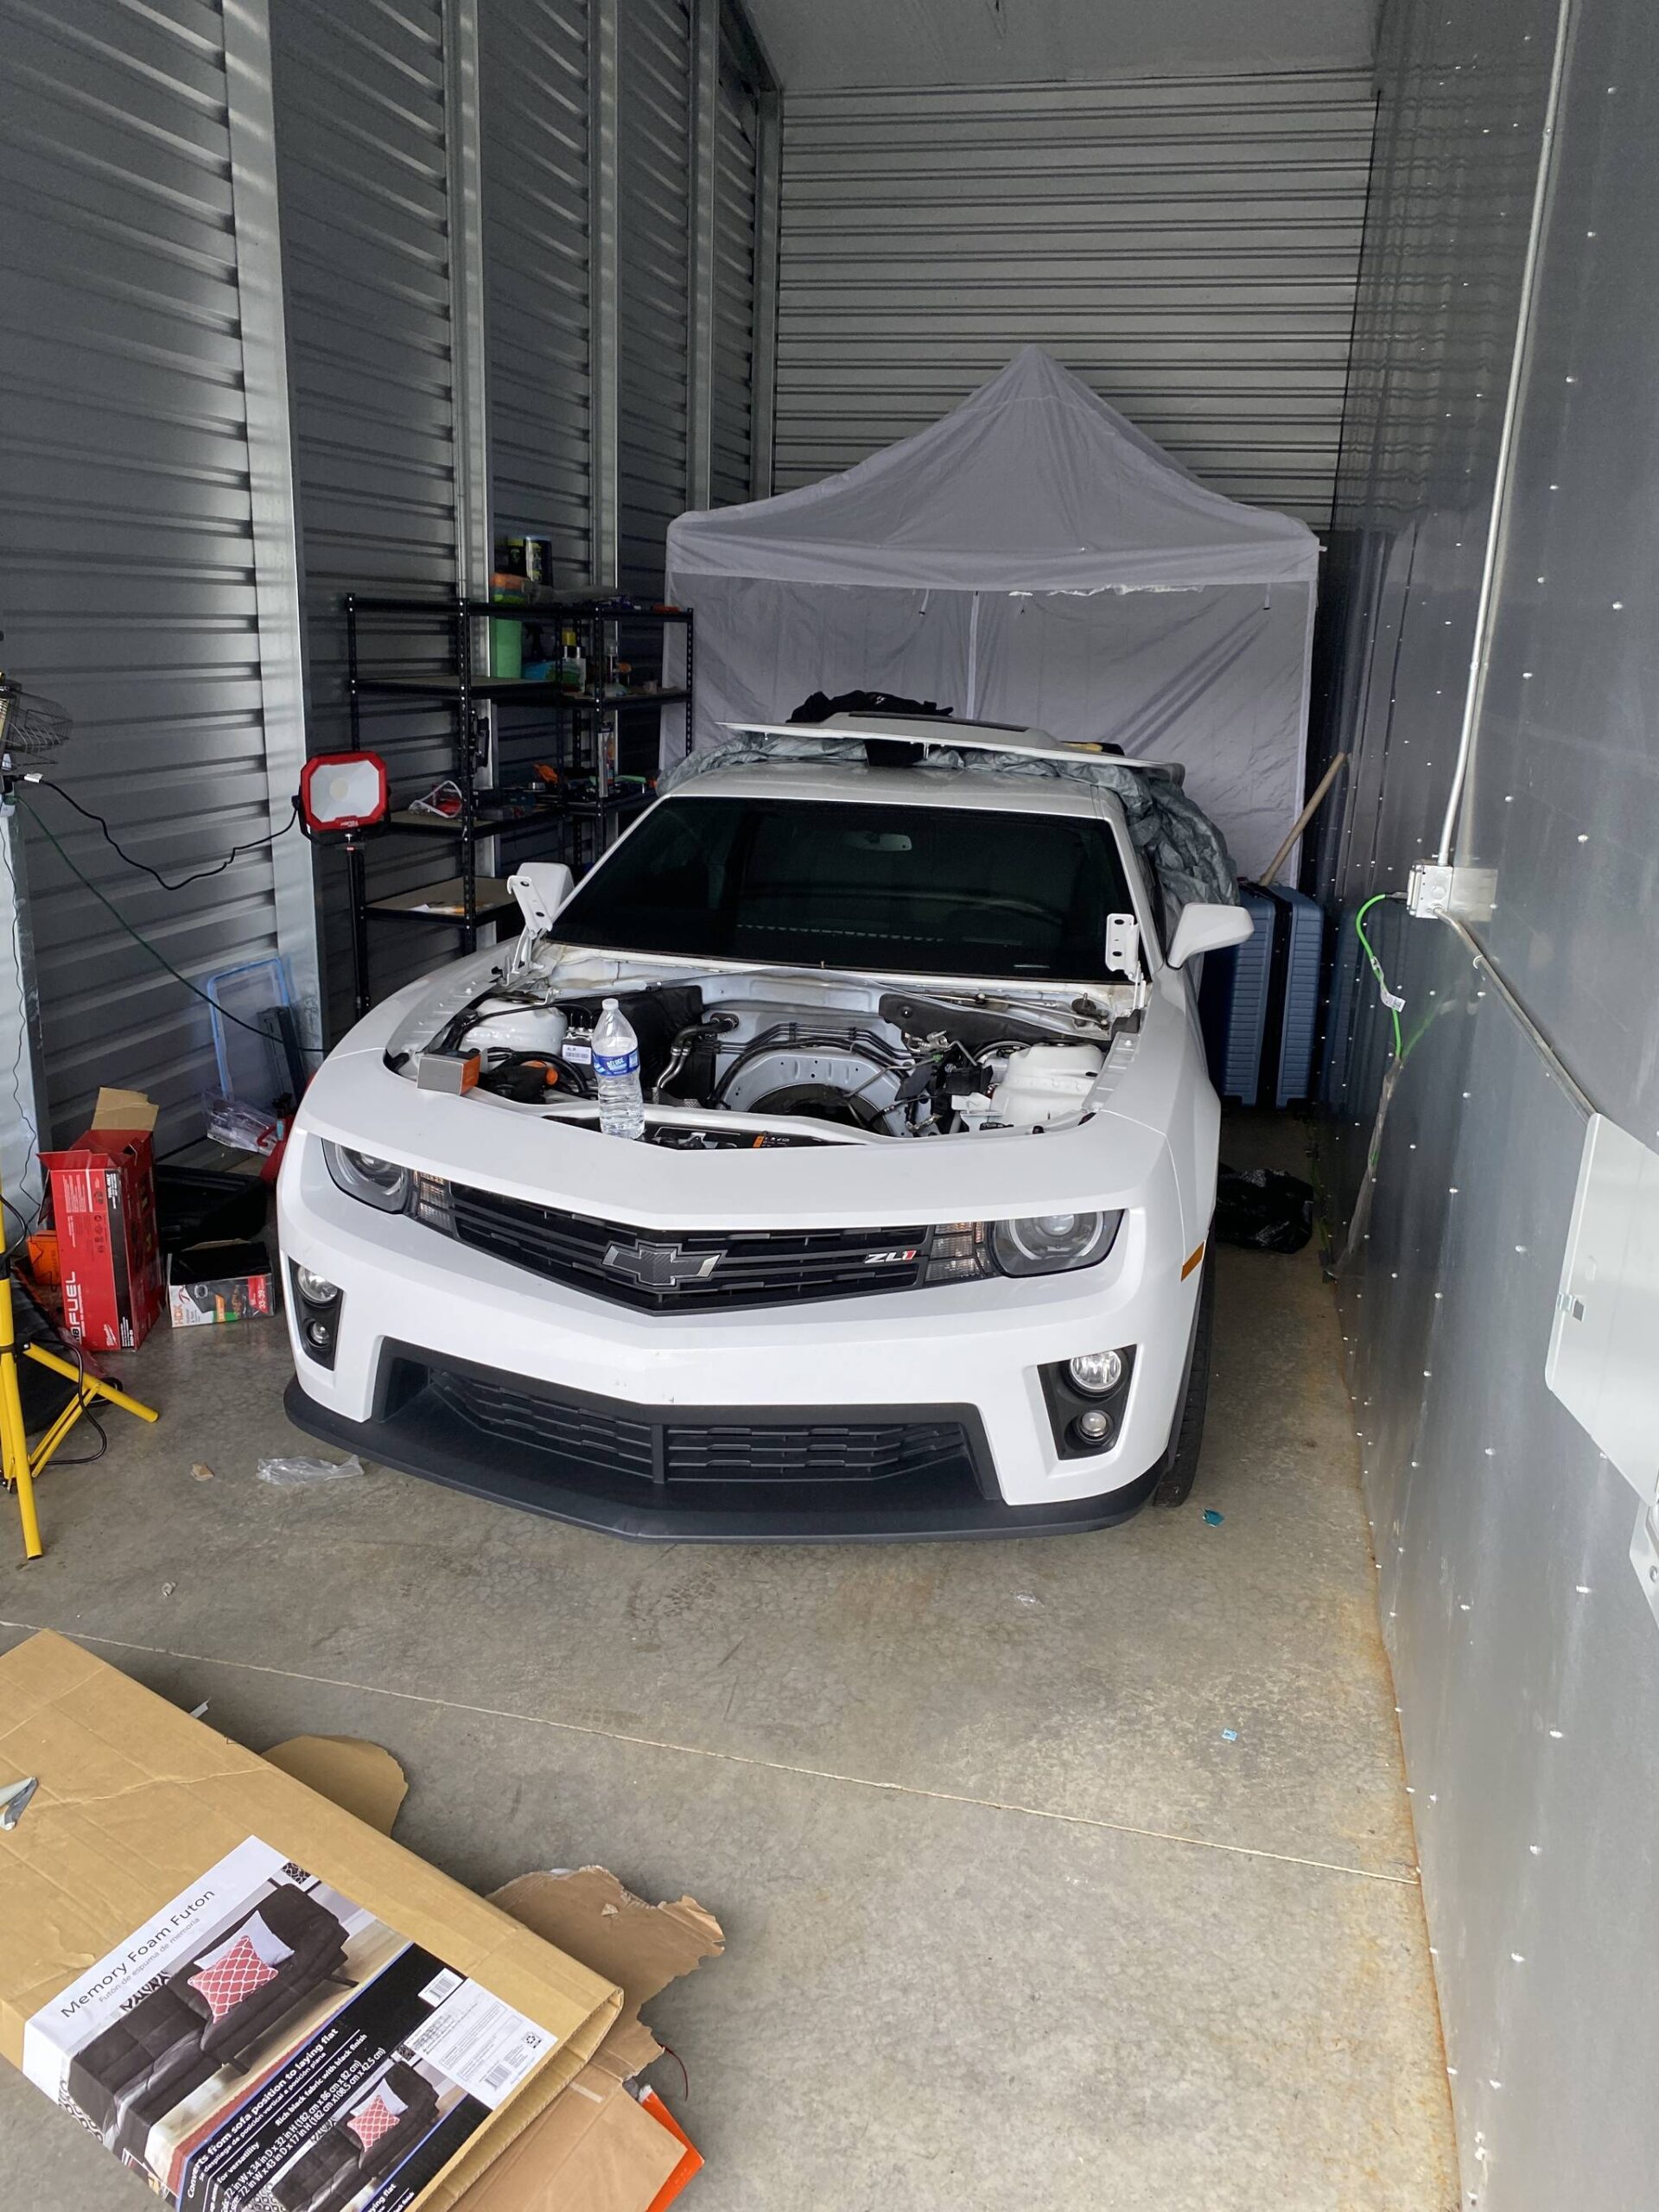 A sports car stripped of its components was one of the discoveries in a storage space registered to a man convicted last month of identity theft following his arrest in Aberdeen. (Courtesy photo / Aberdeen Police Department)